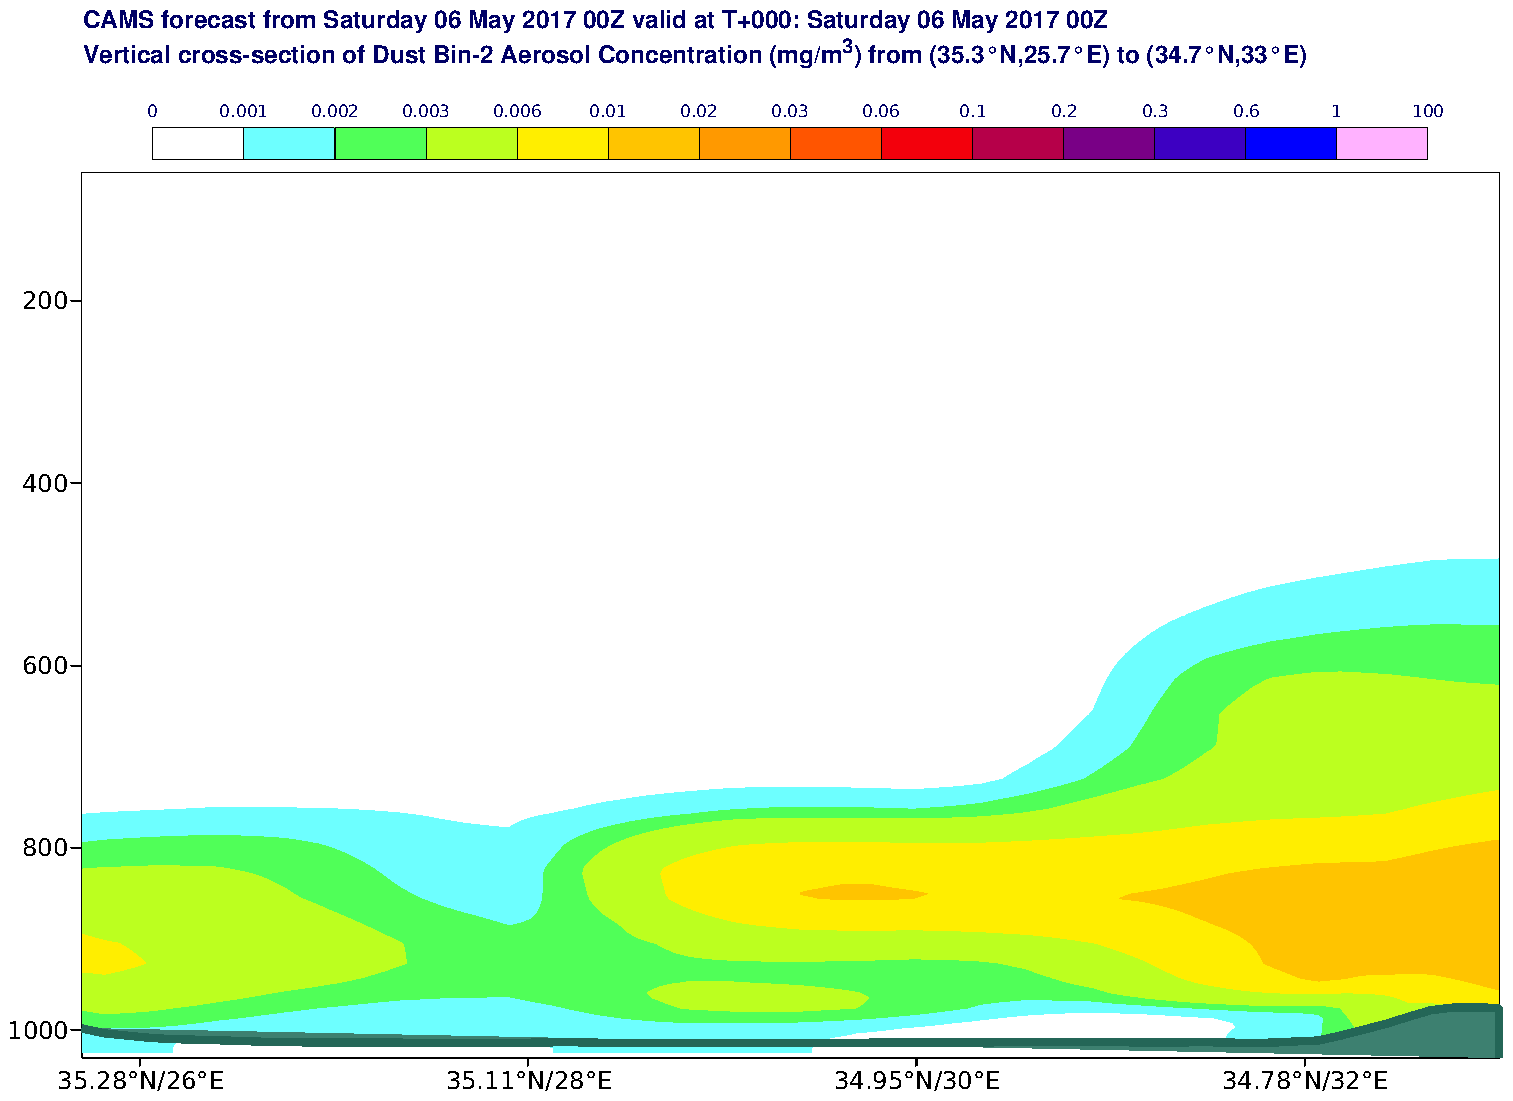 Vertical cross-section of Dust Bin-2 Aerosol Concentration (mg/m3) valid at T0 - 2017-05-06 00:00